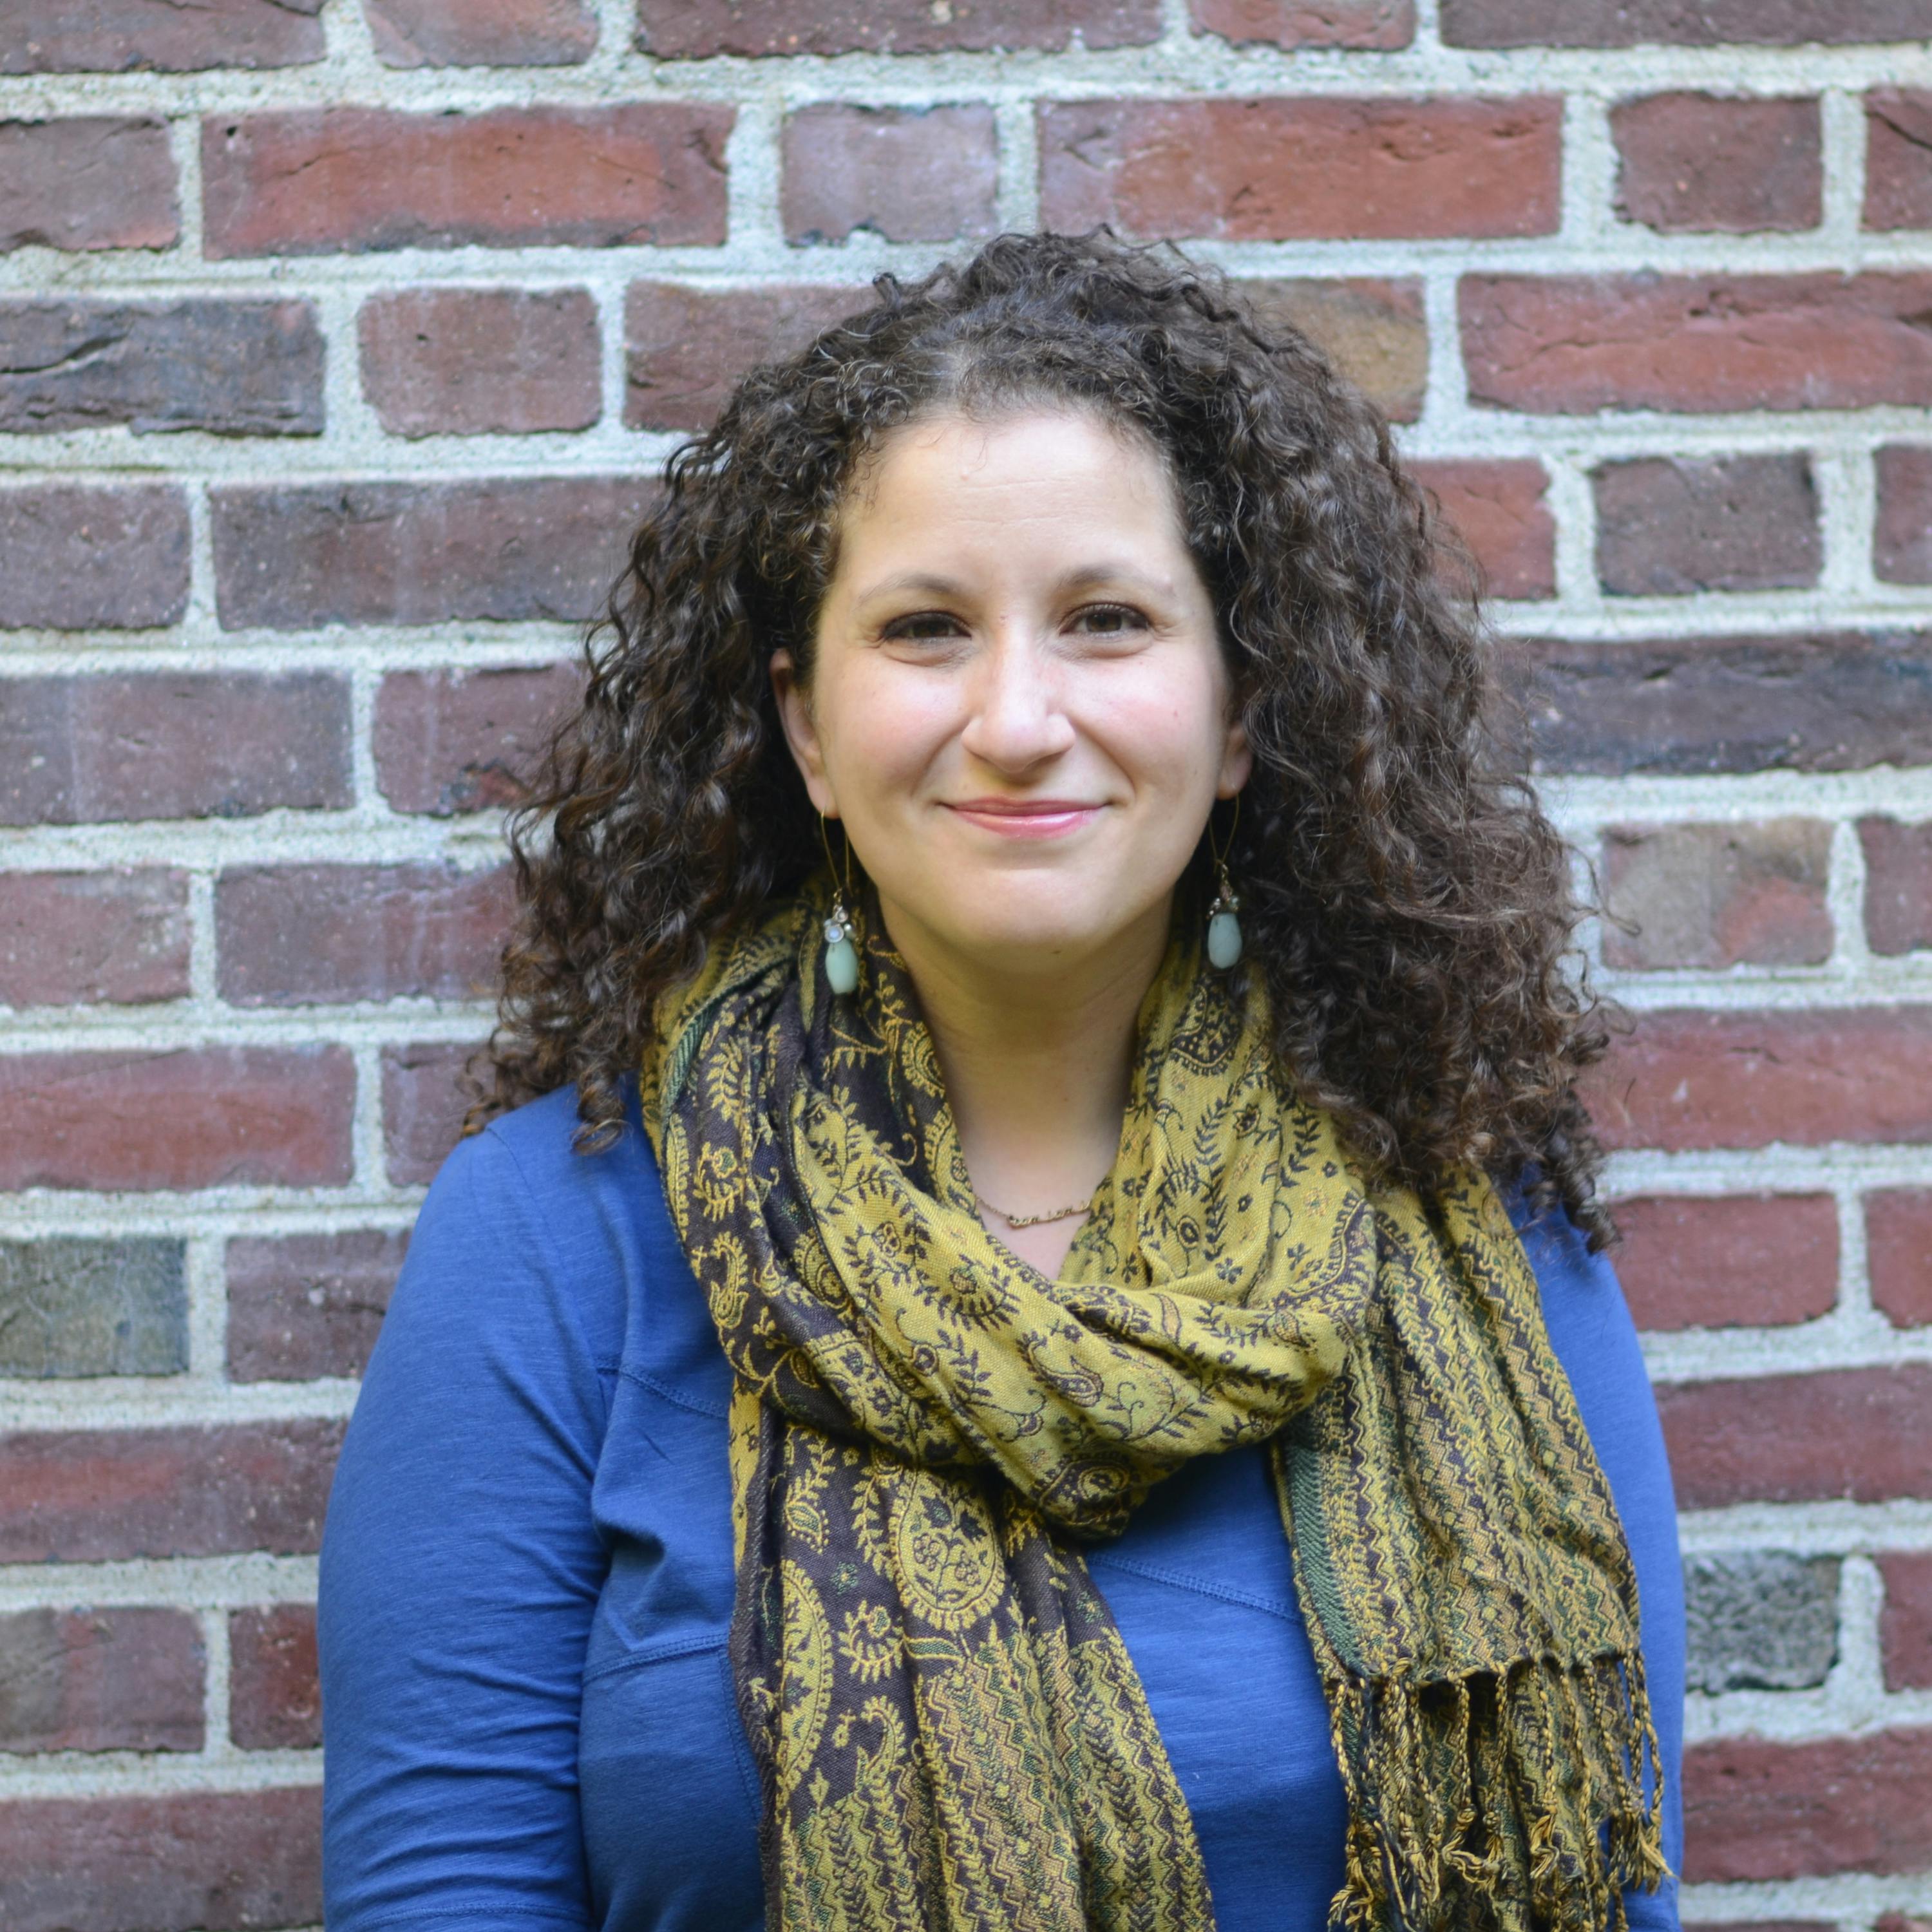 Vanessa Zoltan stands against a brick wall in a blue shirt and yellow scarf